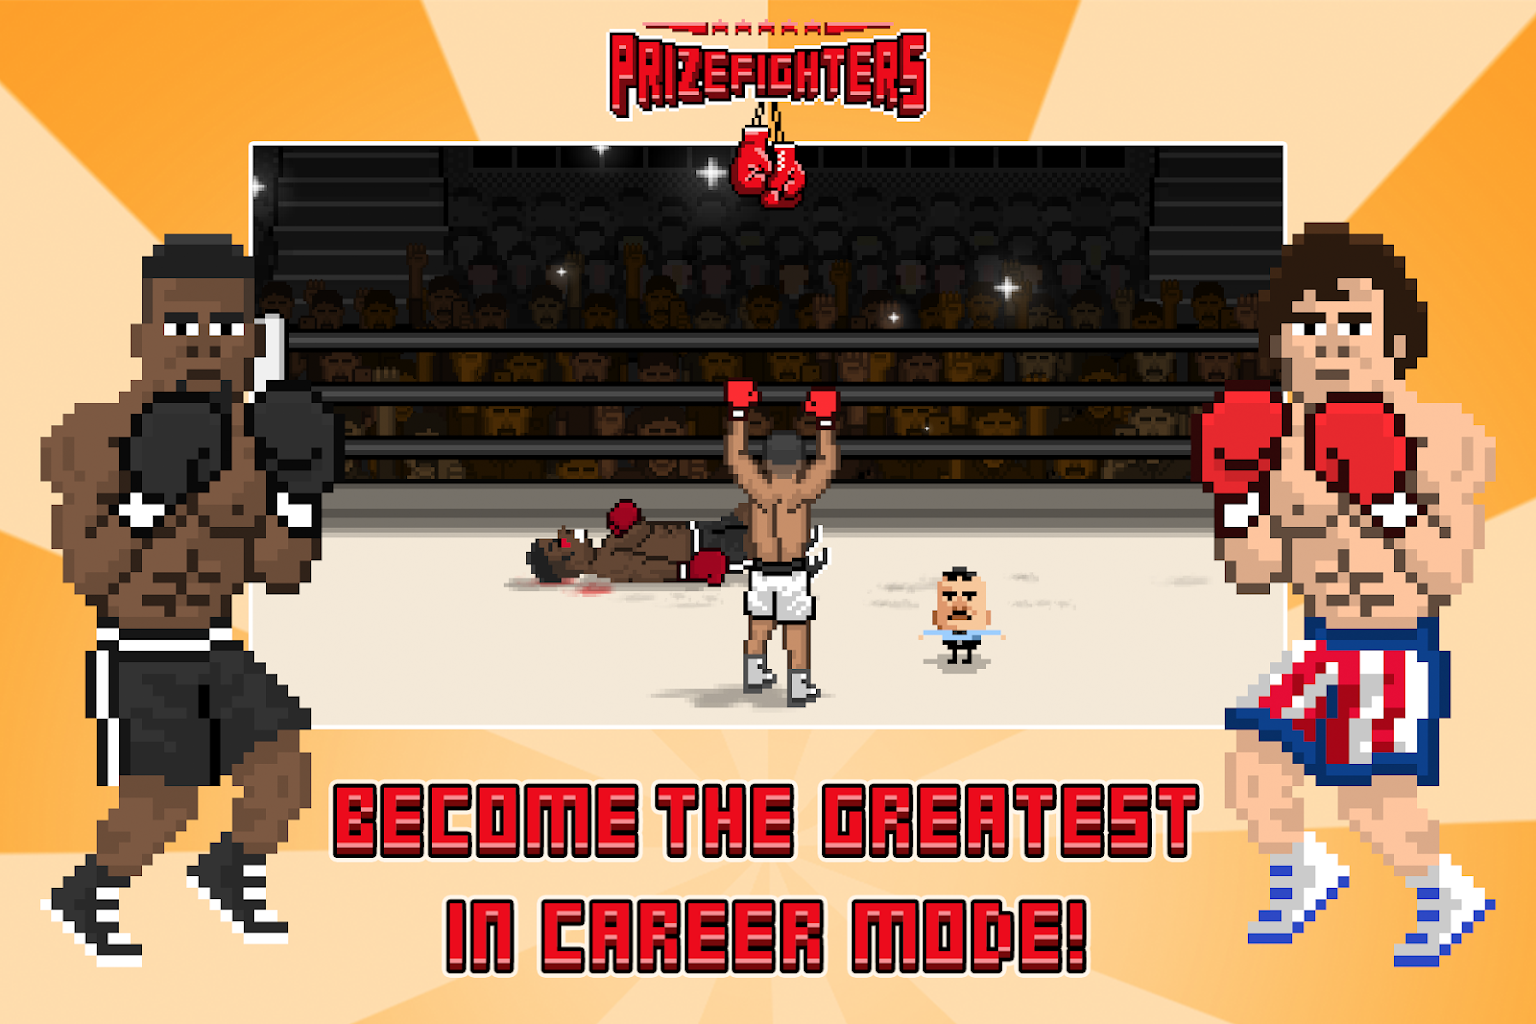 Prize fighter video game